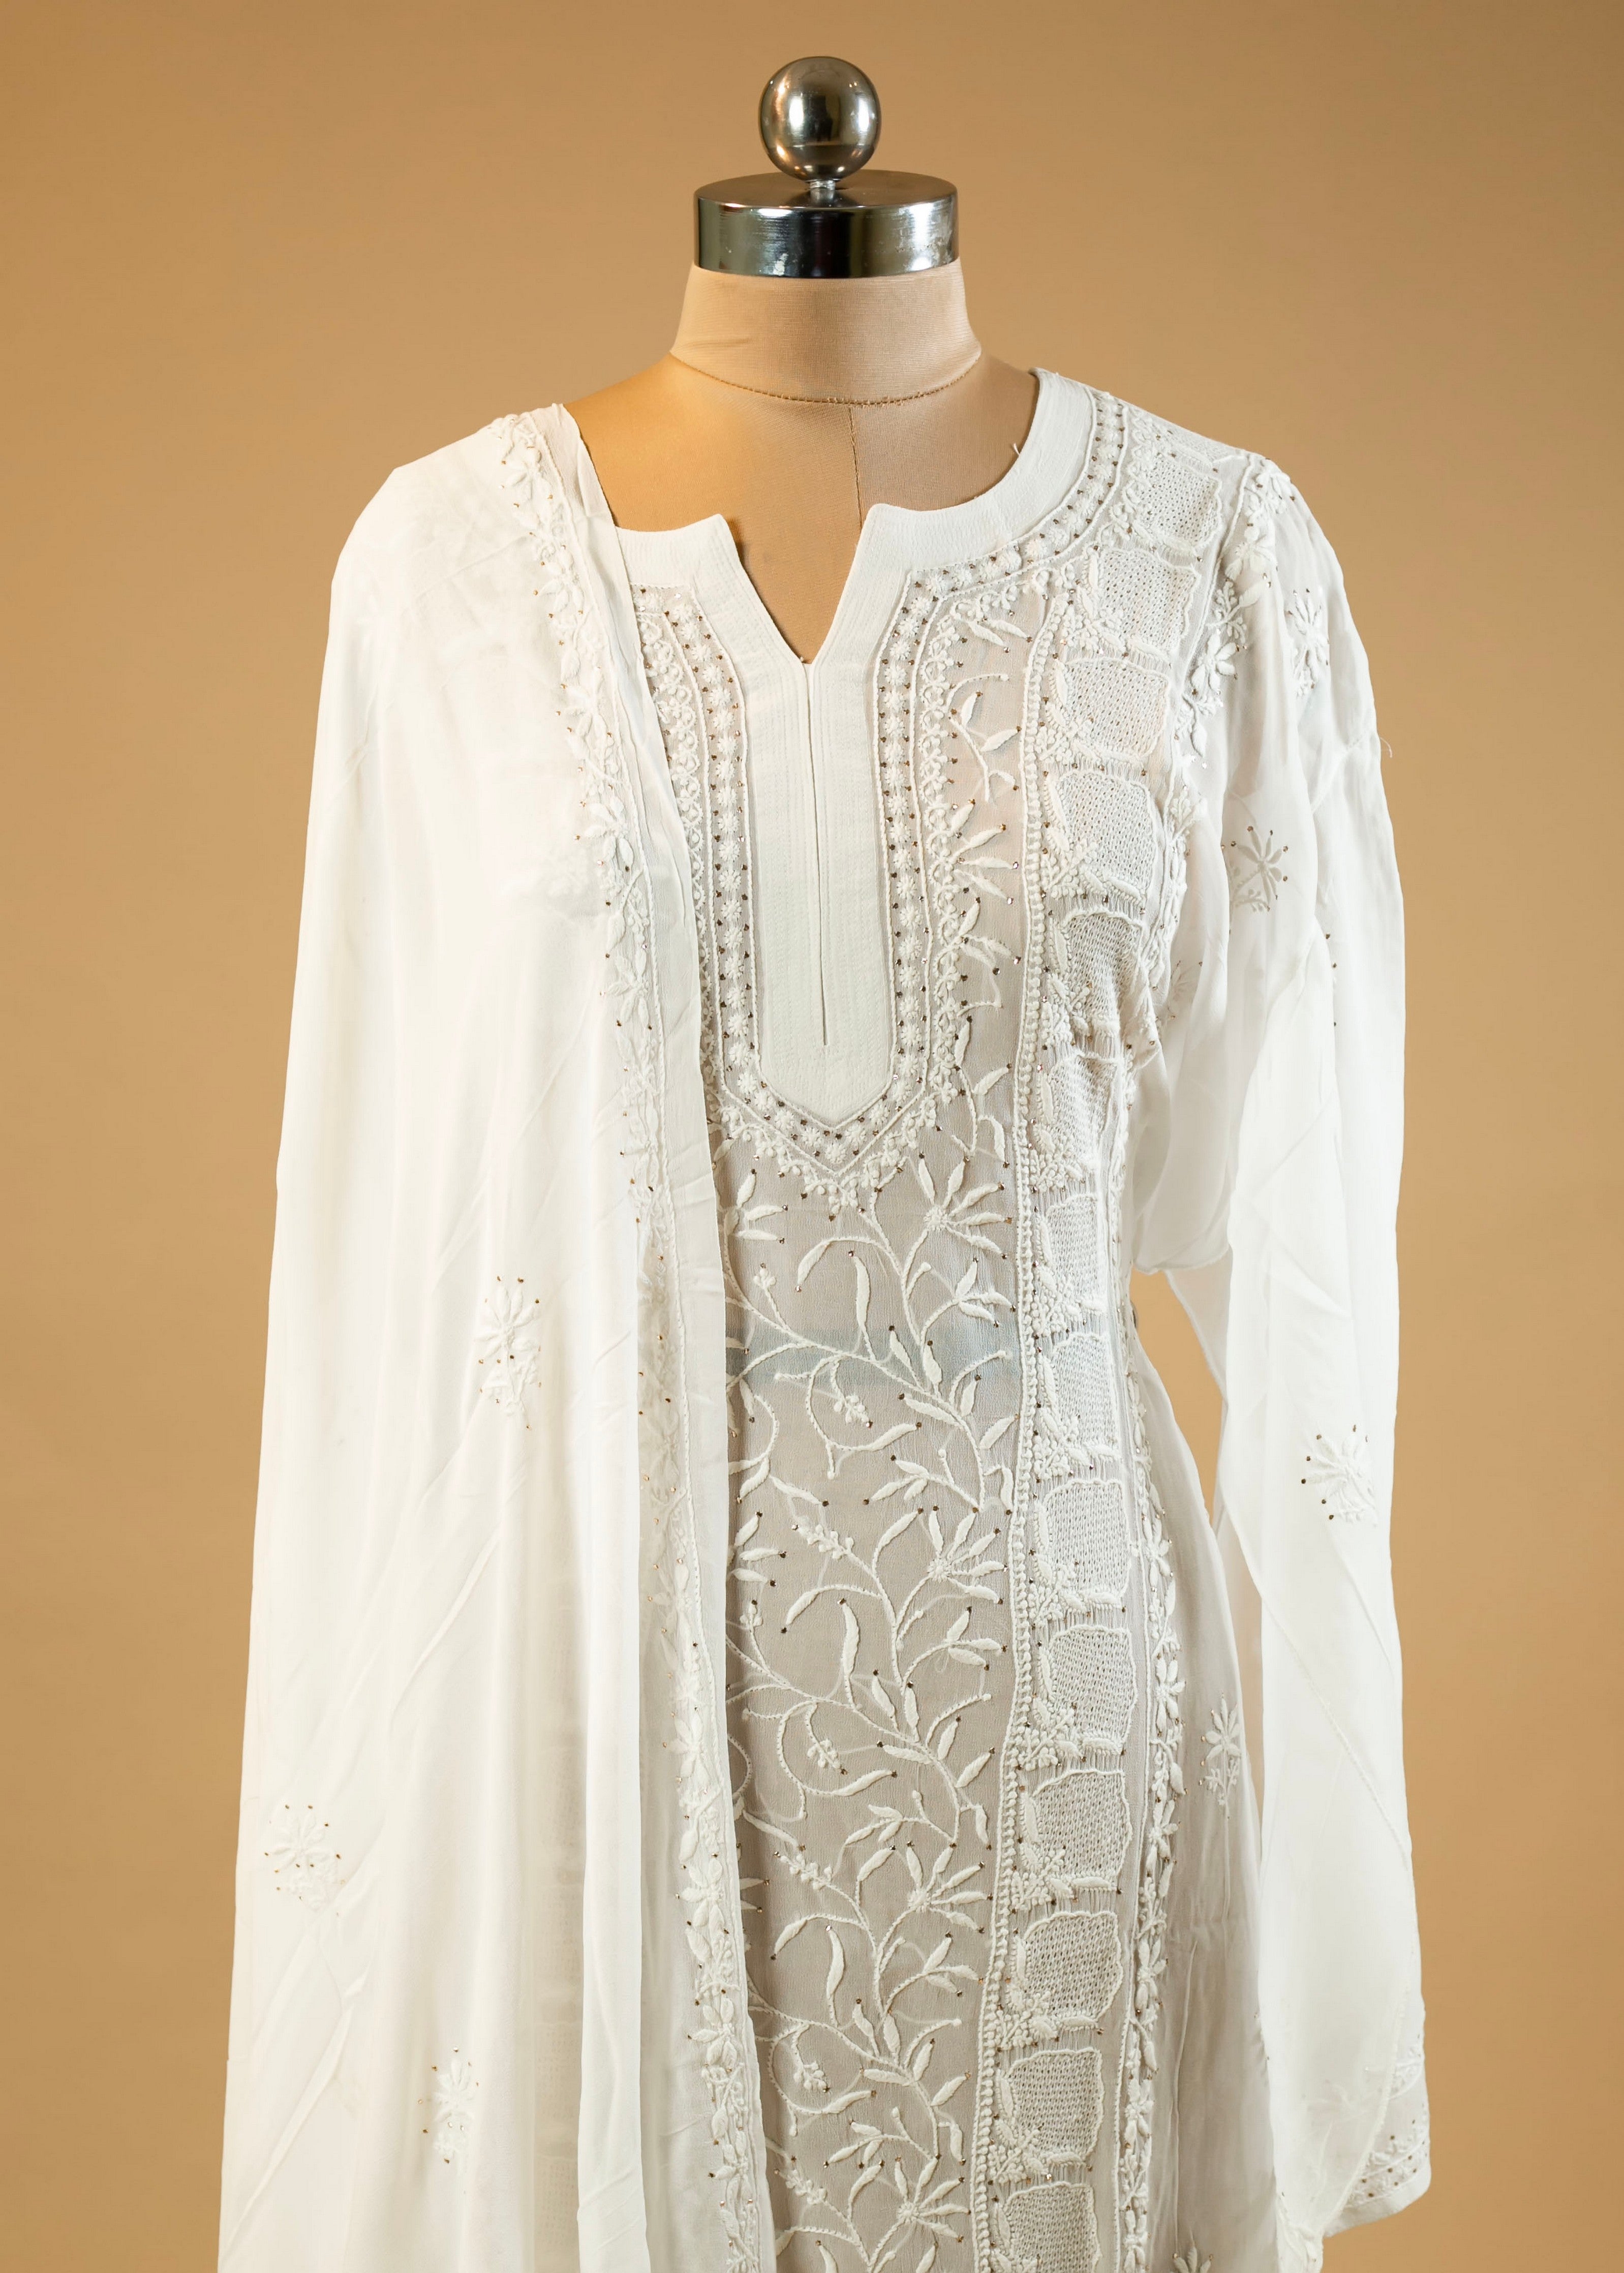 Hand-Embroidered Chikankari Lucknowi Shirt Set - Dyeable Georgette Fabric, Embroidered Dupatta, and Plain Bottoms